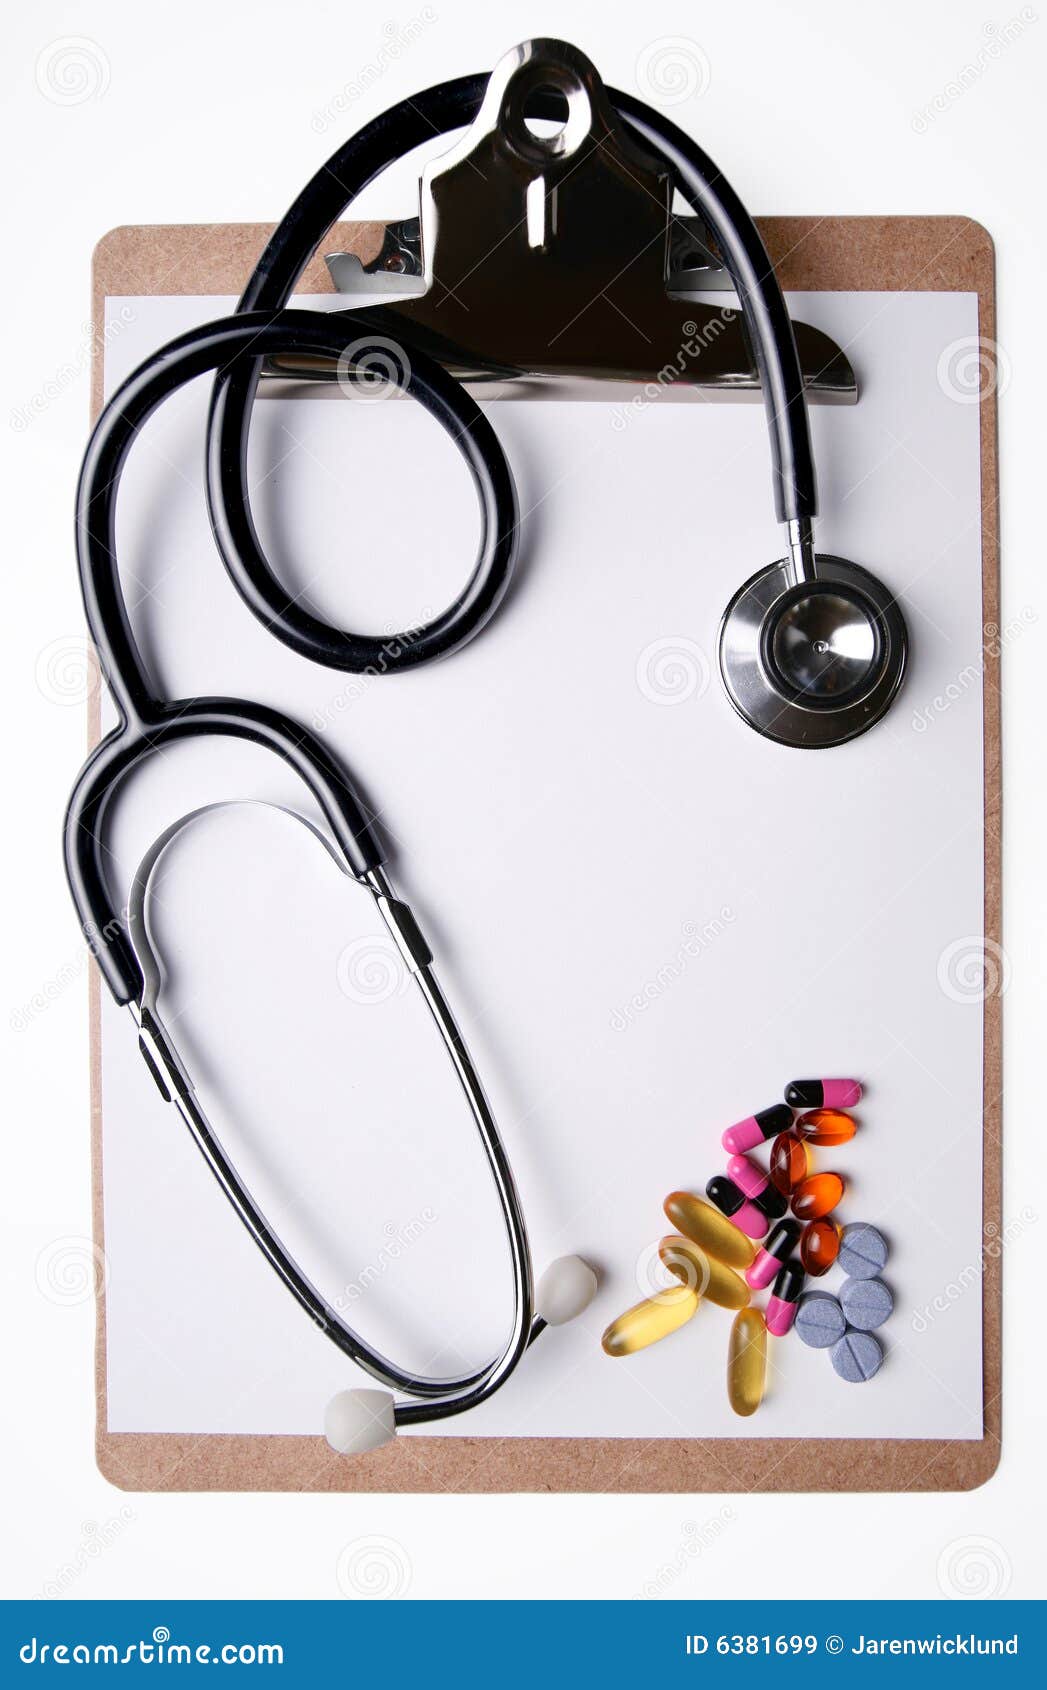 stethoscope and medicine on clipboard